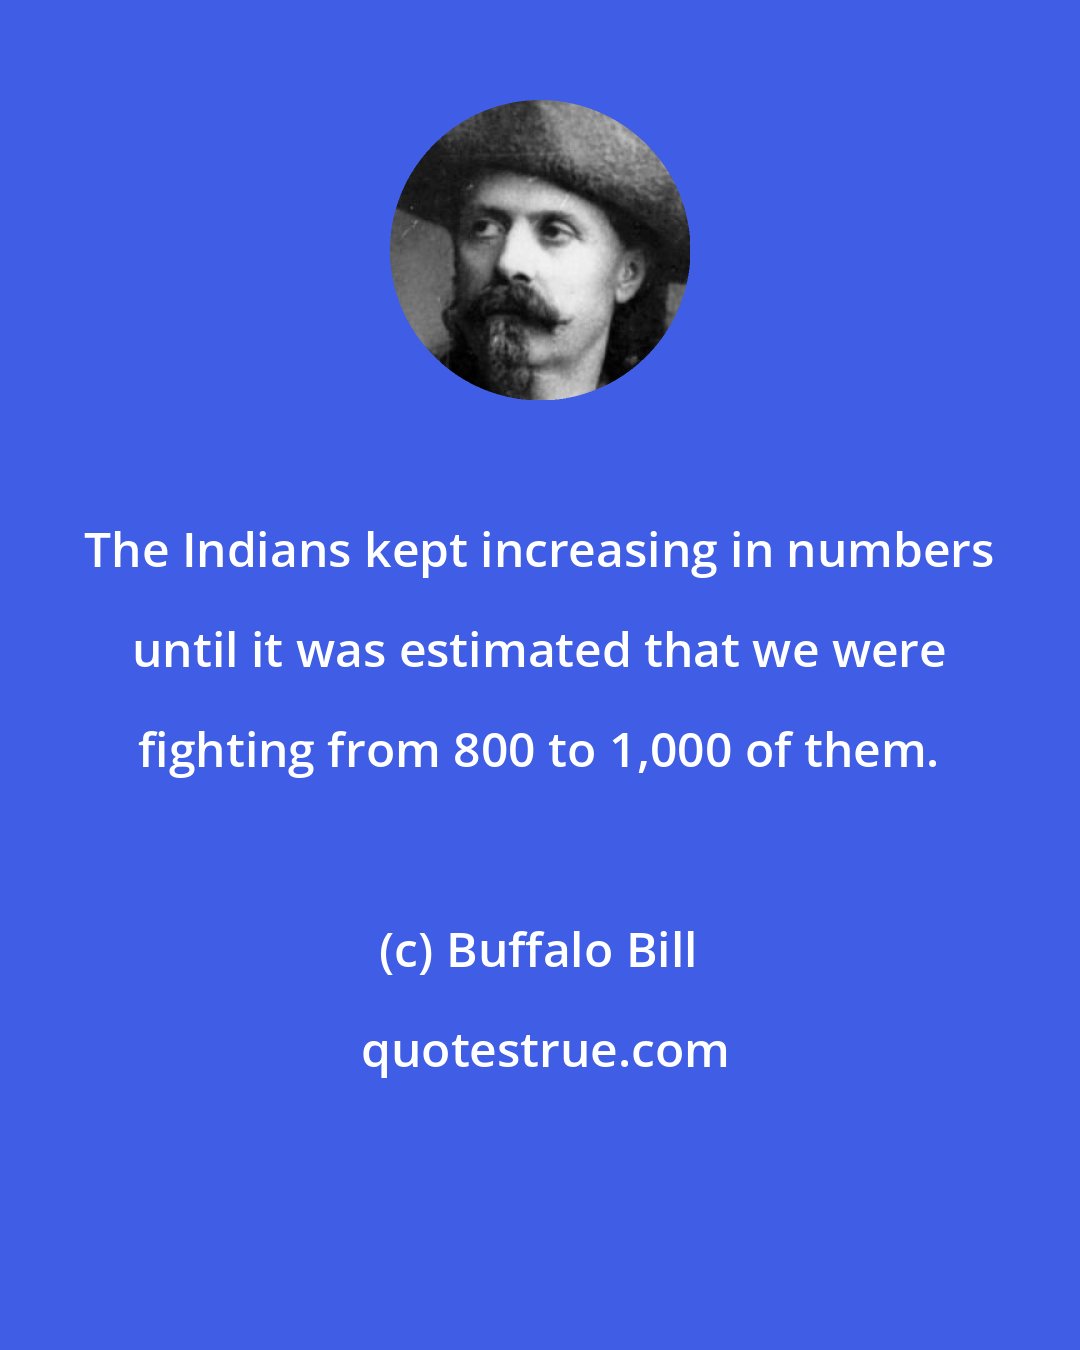 Buffalo Bill: The Indians kept increasing in numbers until it was estimated that we were fighting from 800 to 1,000 of them.